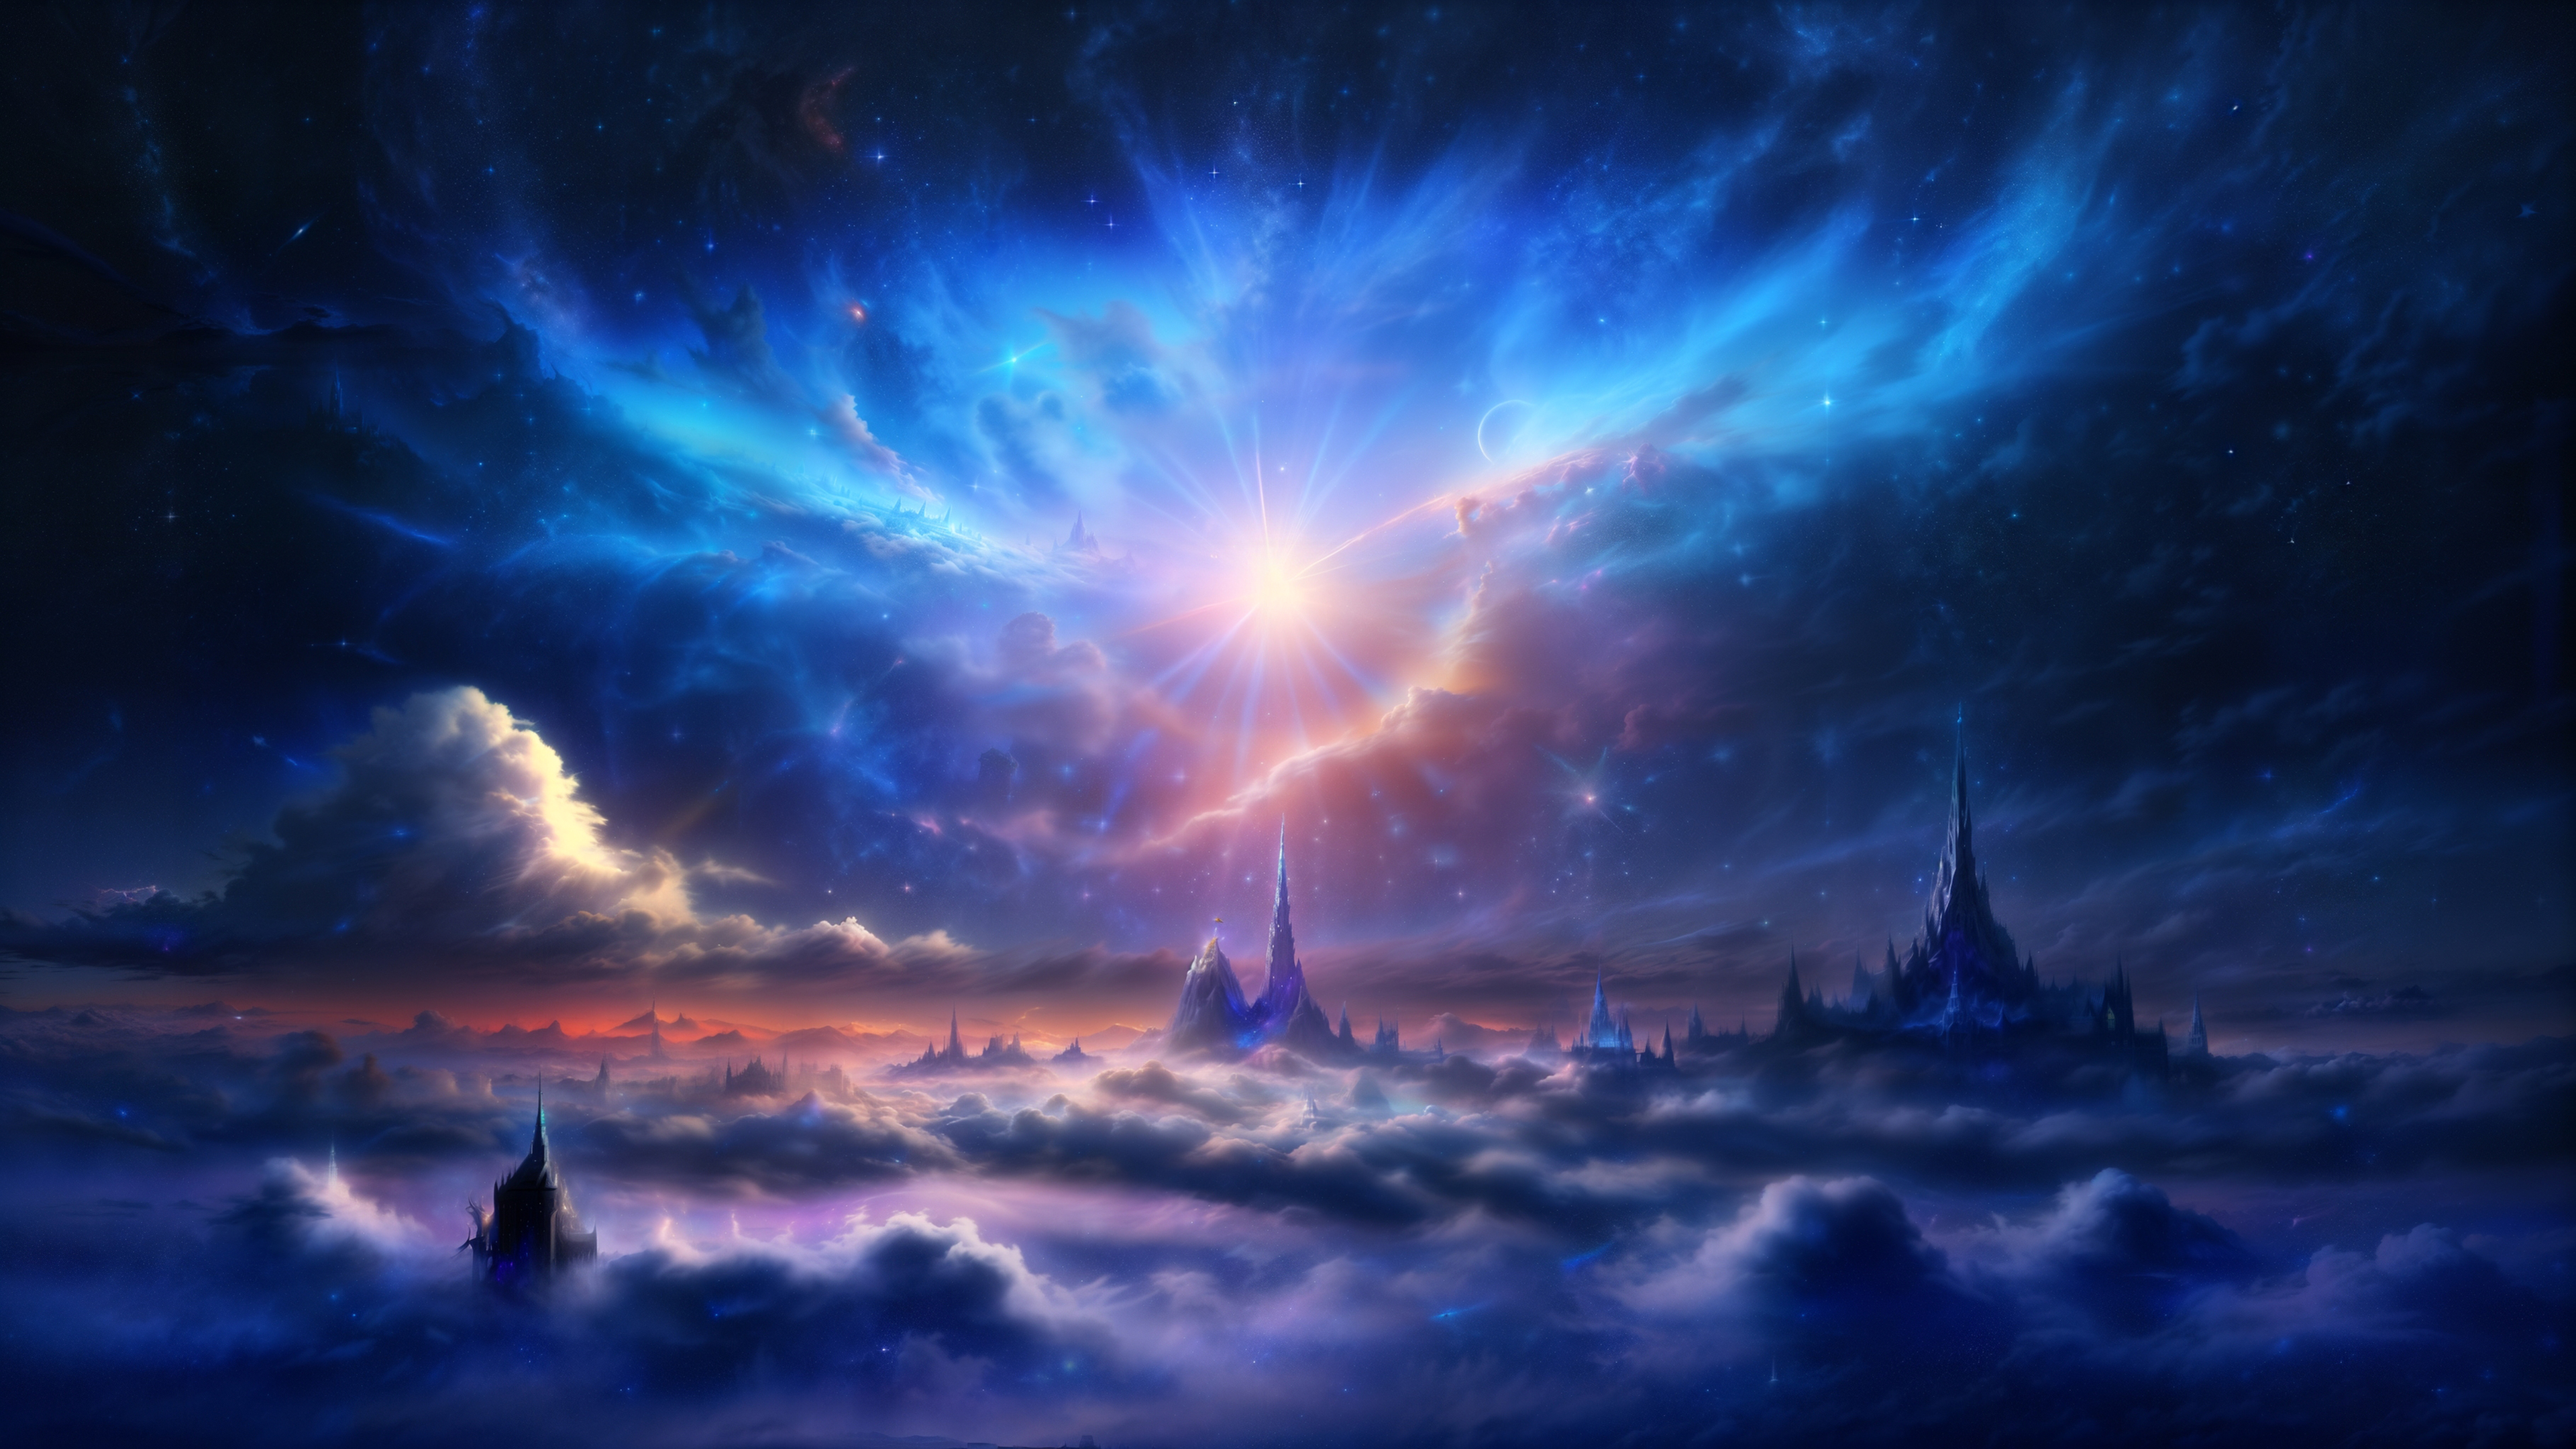 A fantasy city with clouds and starry skies